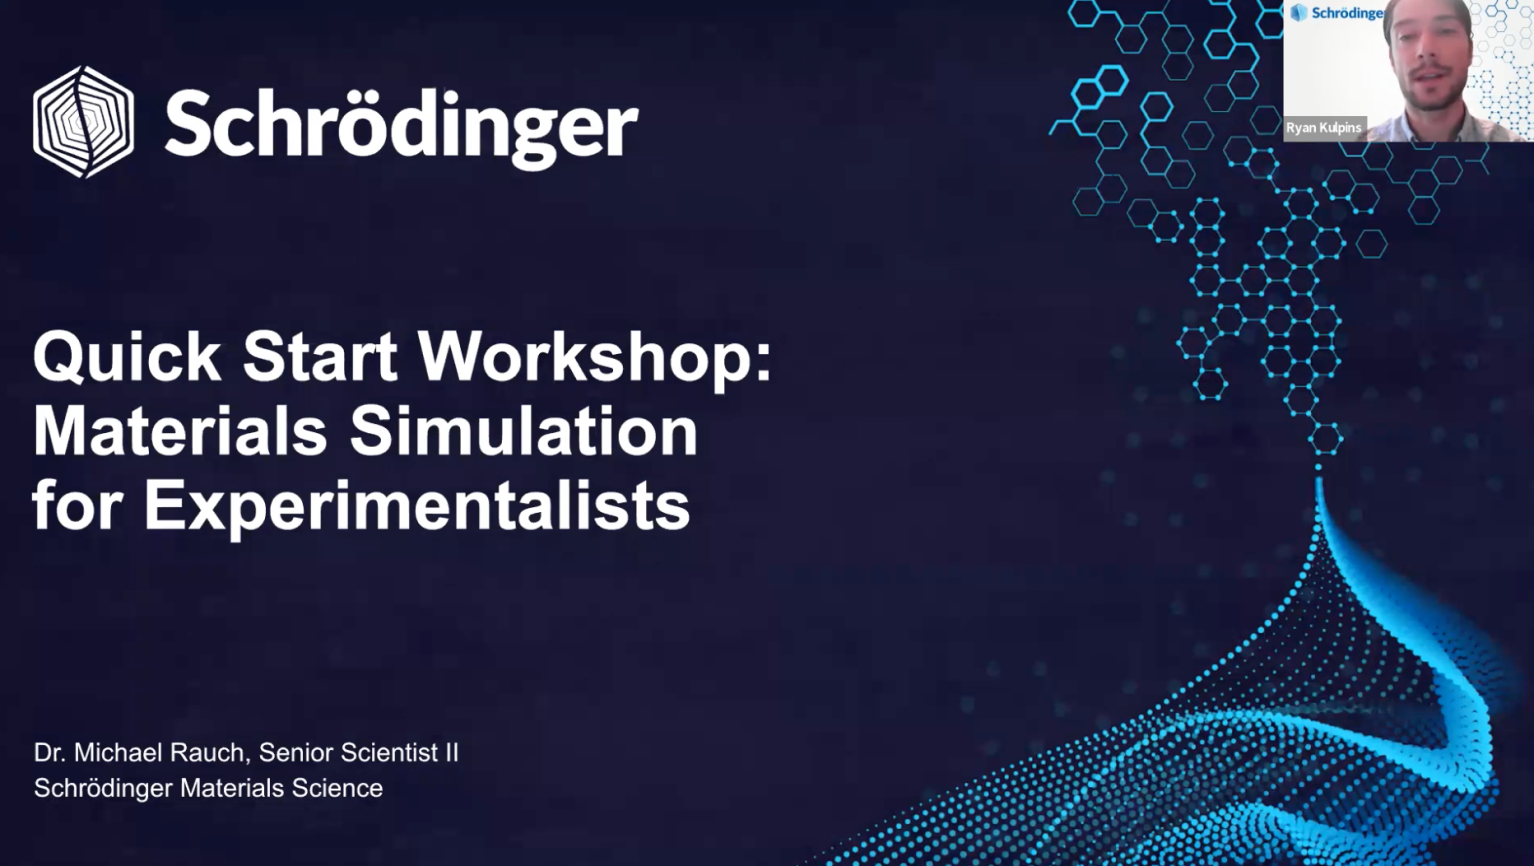 Quick Start Workshop: Materials Simulation for Experimentalists